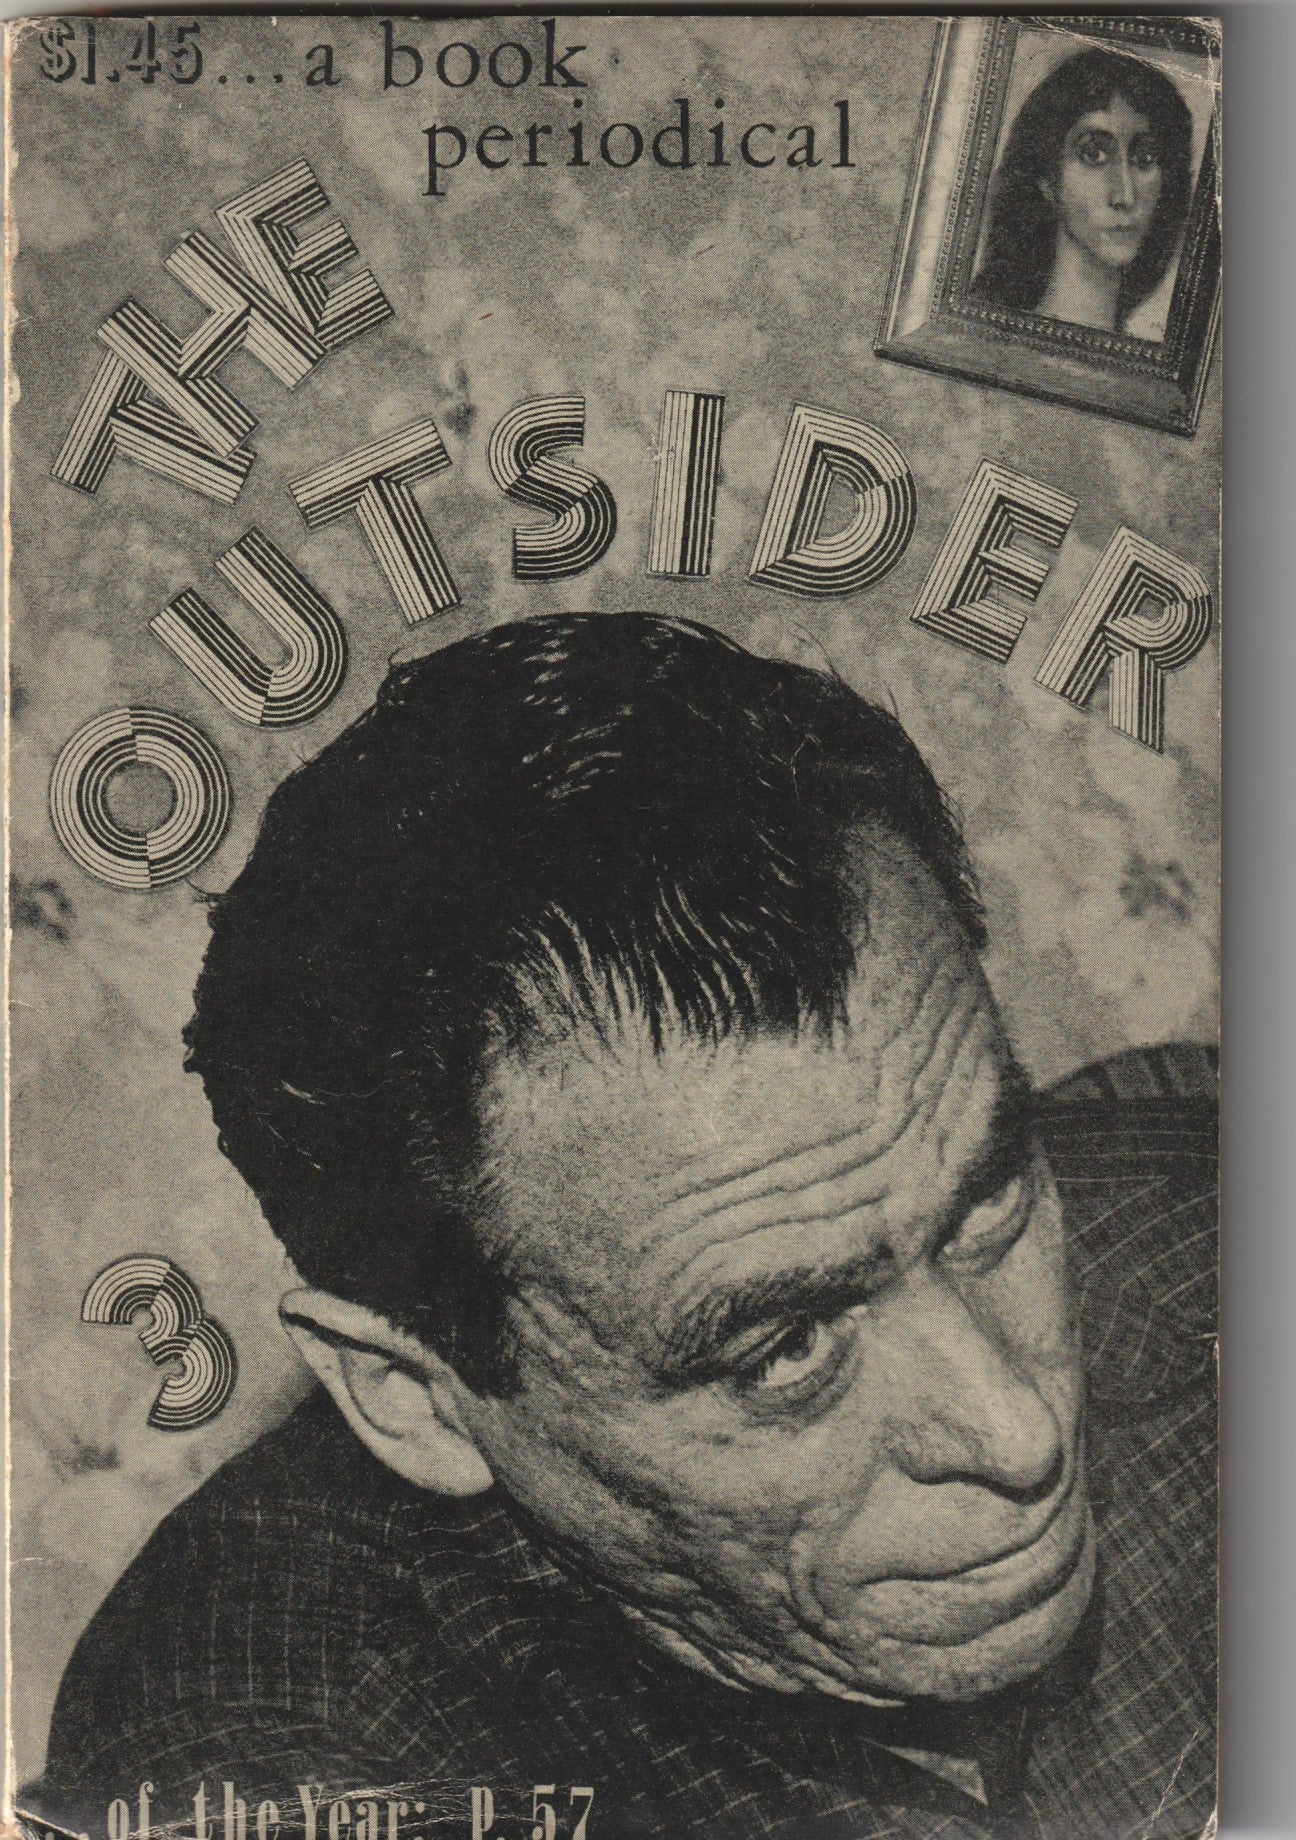 Charles Bukowski, Outsider of the Year Special Section (1963)